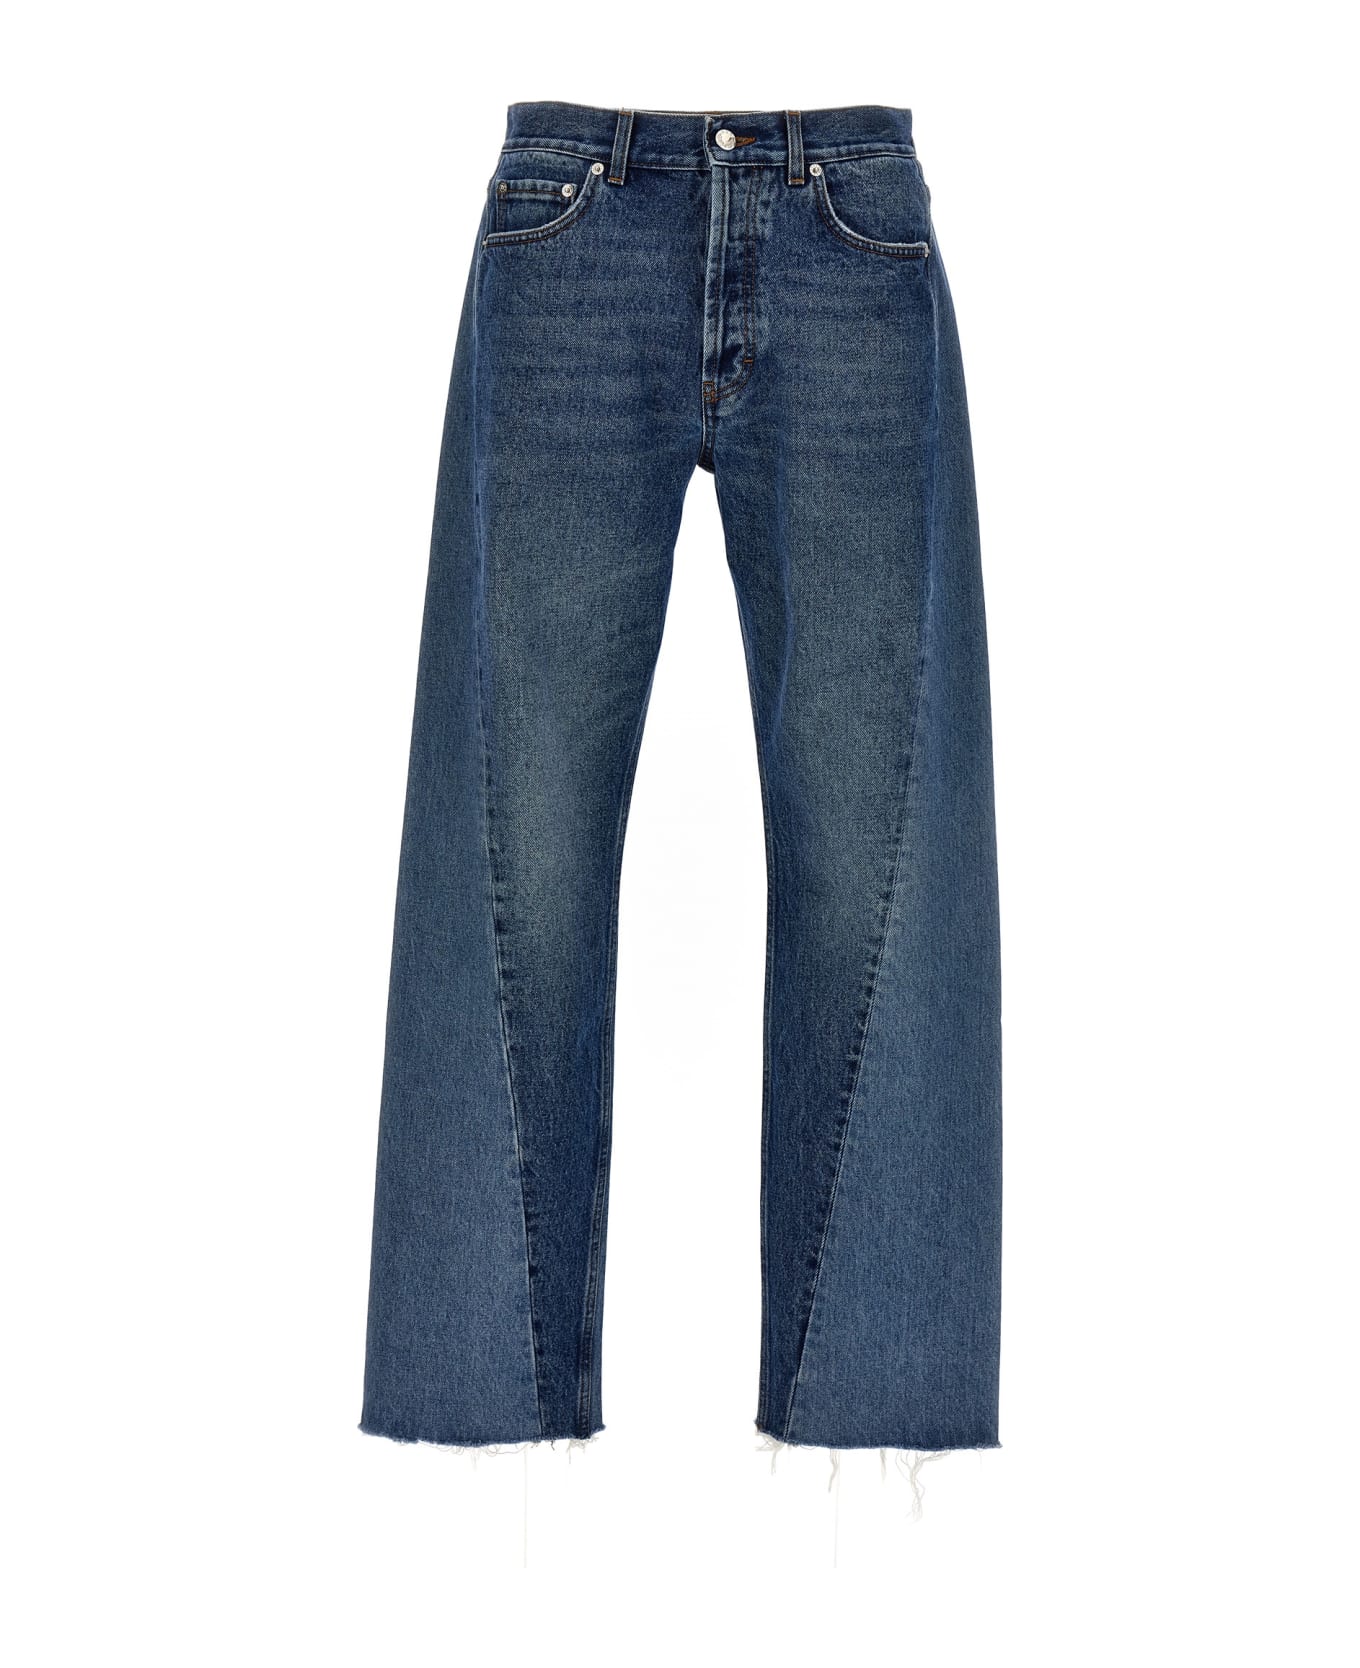 Séfr 'twisted' Jeans - Blue デニム